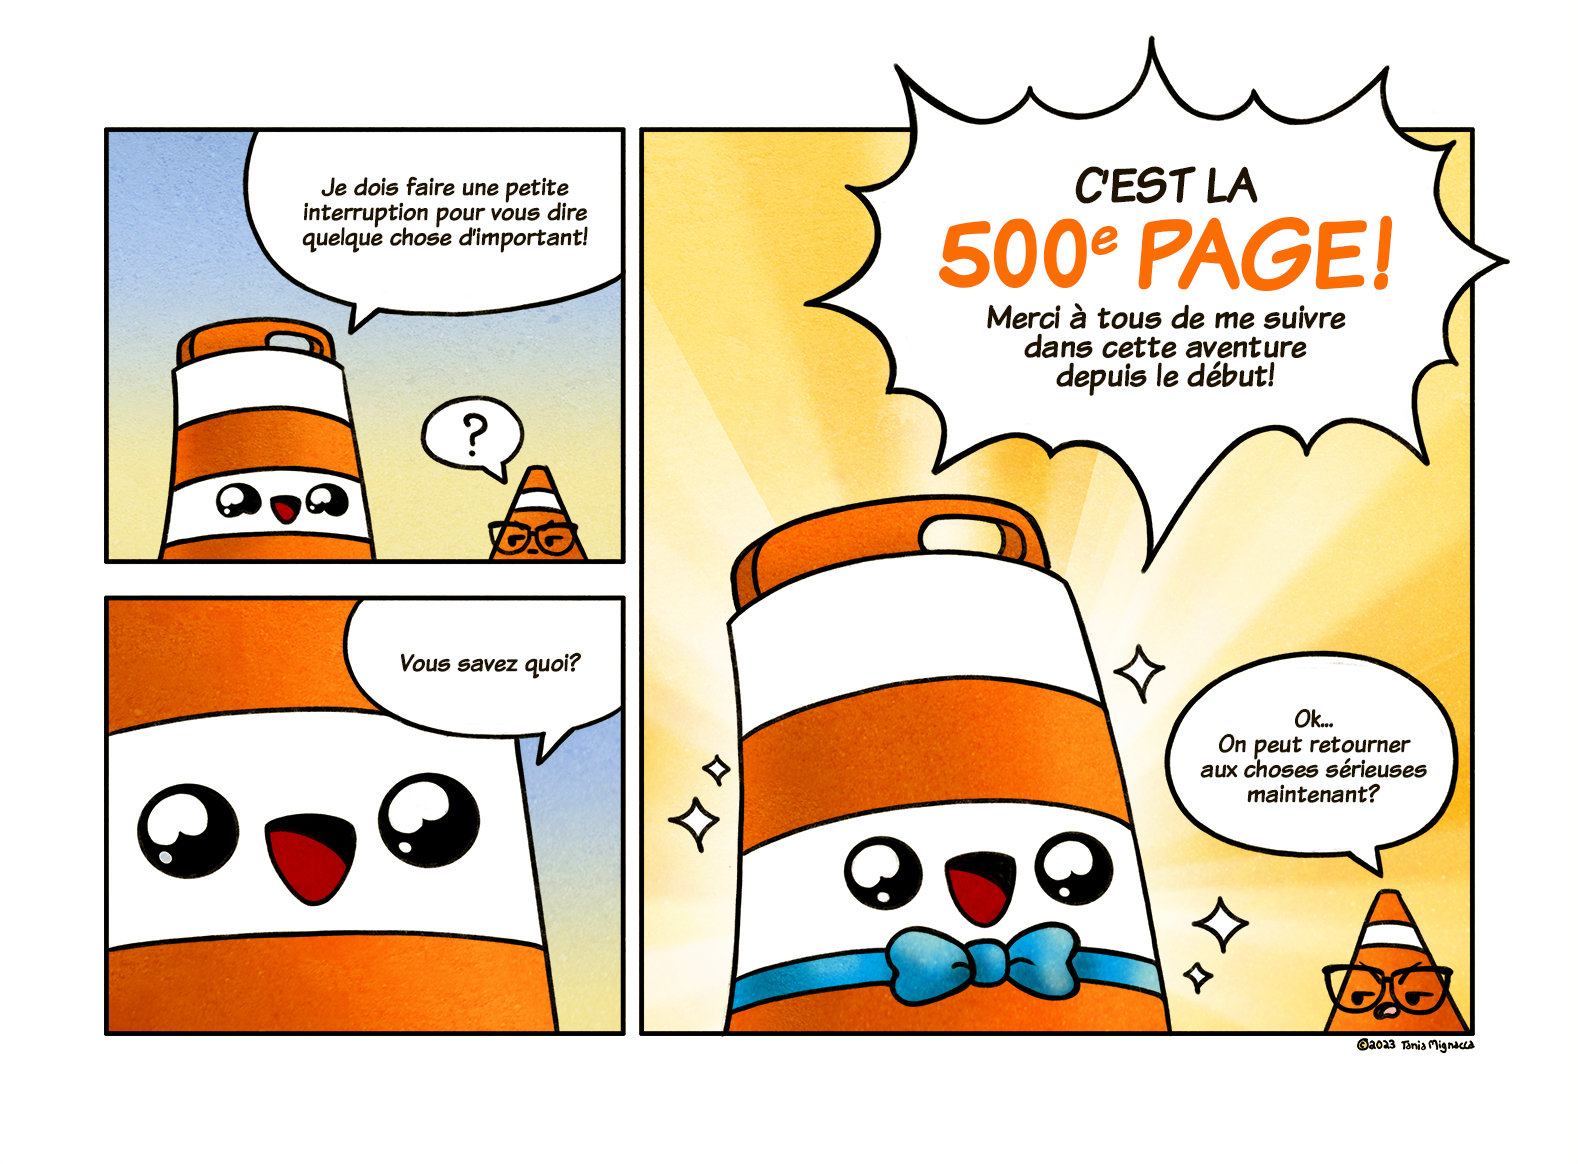 Page 500